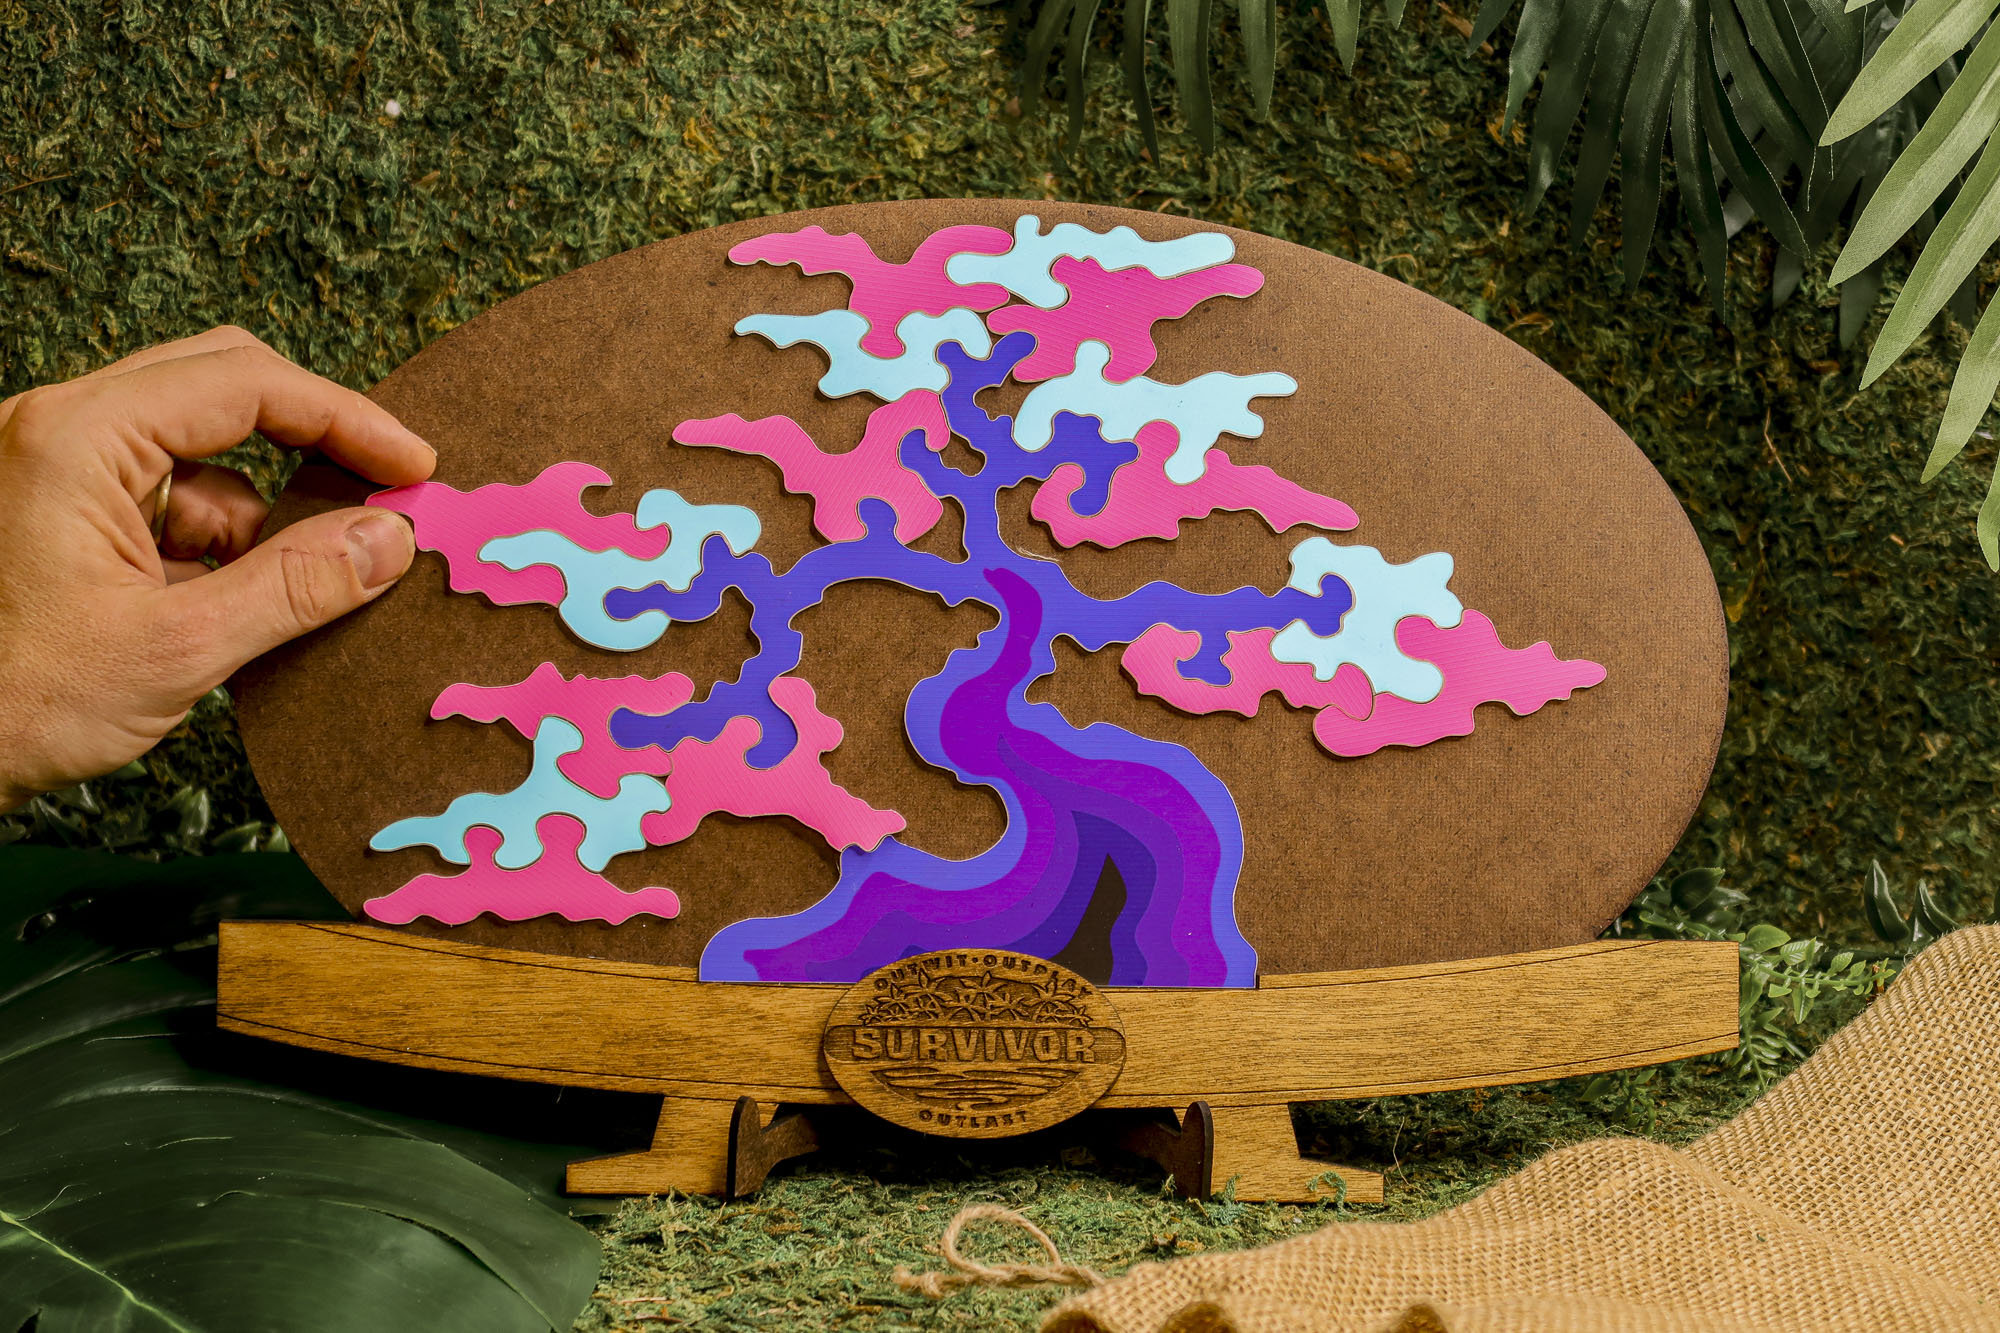 Survivor Inspired Tree Puzzle Replica seen on Winners at War 